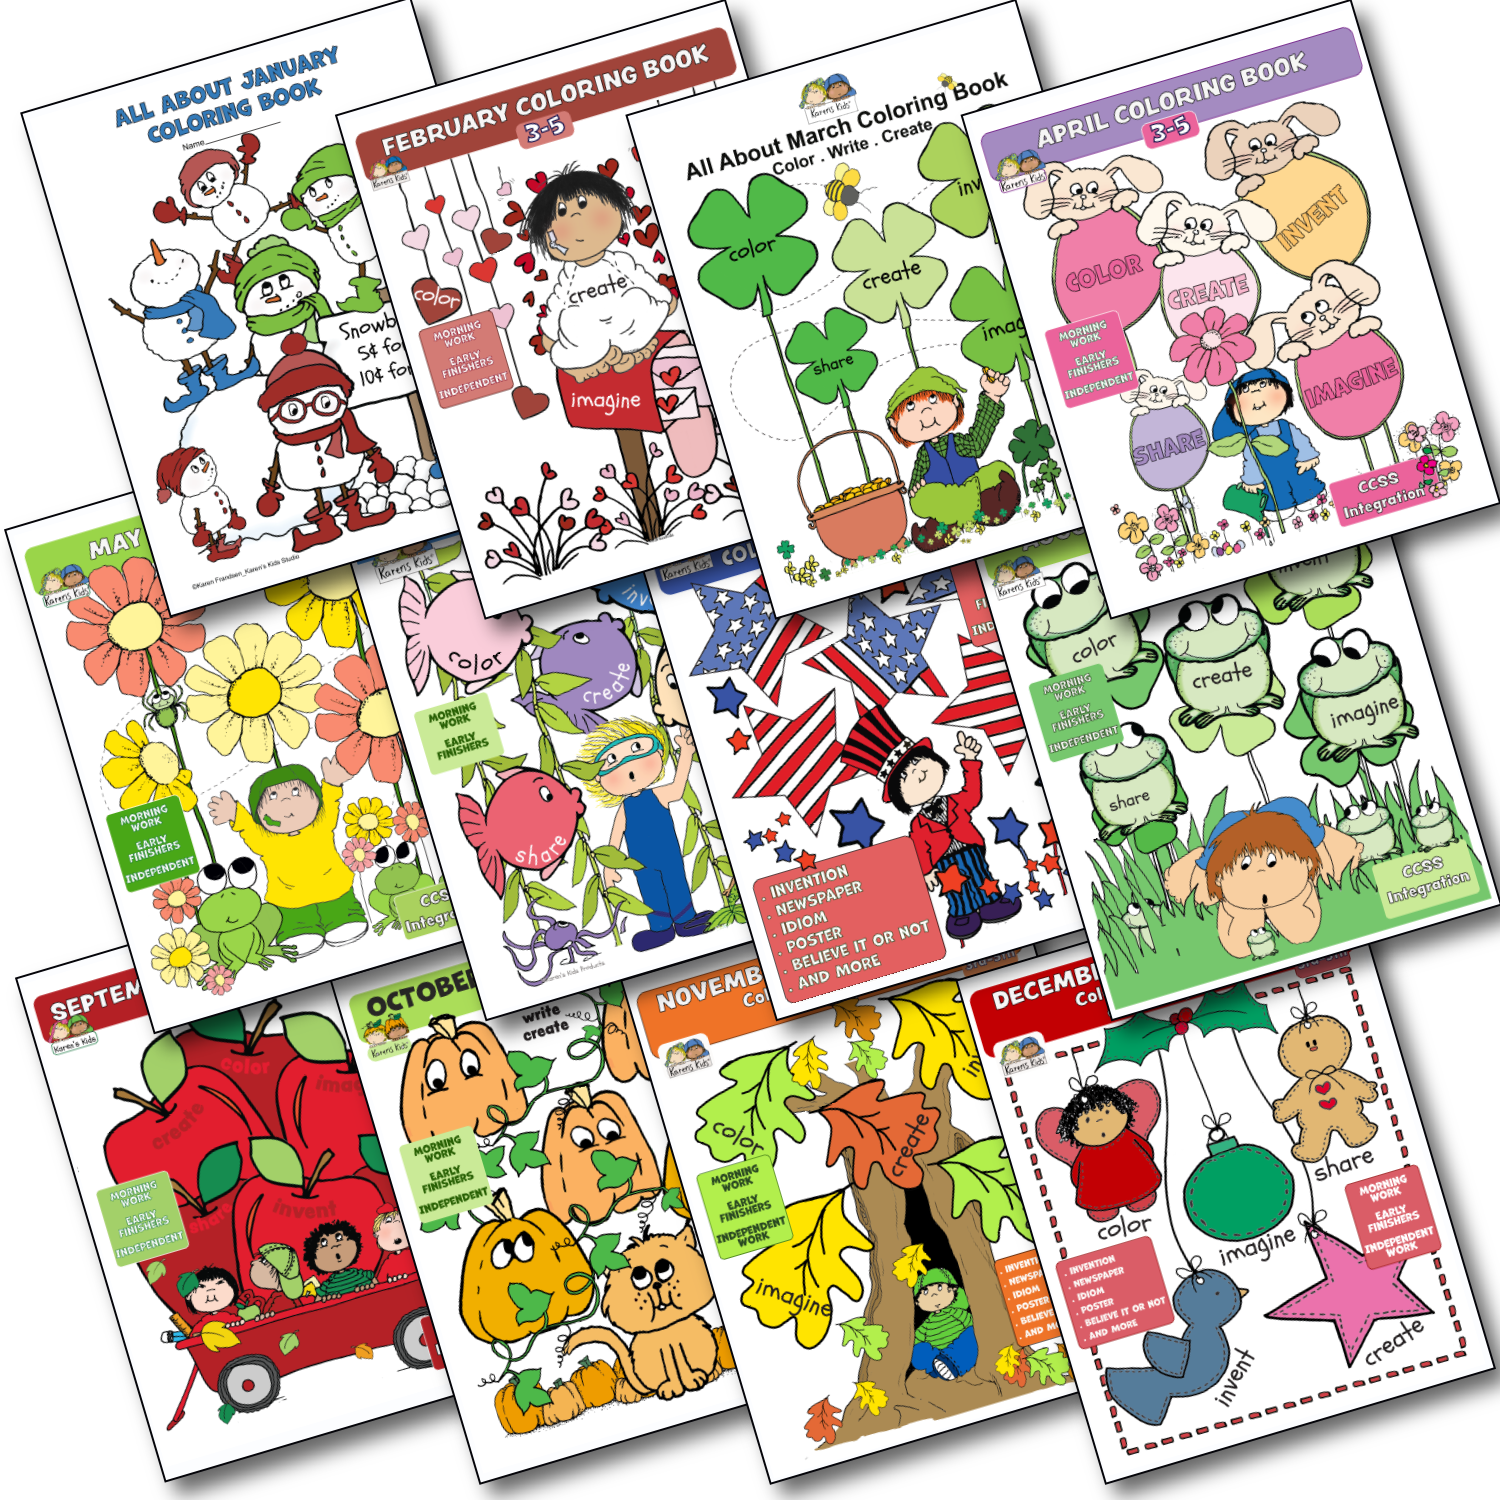 12 different colorful covers of color-activity books, one for each month of the year. January snowmen, February hearts, March Leprechauns and more. 